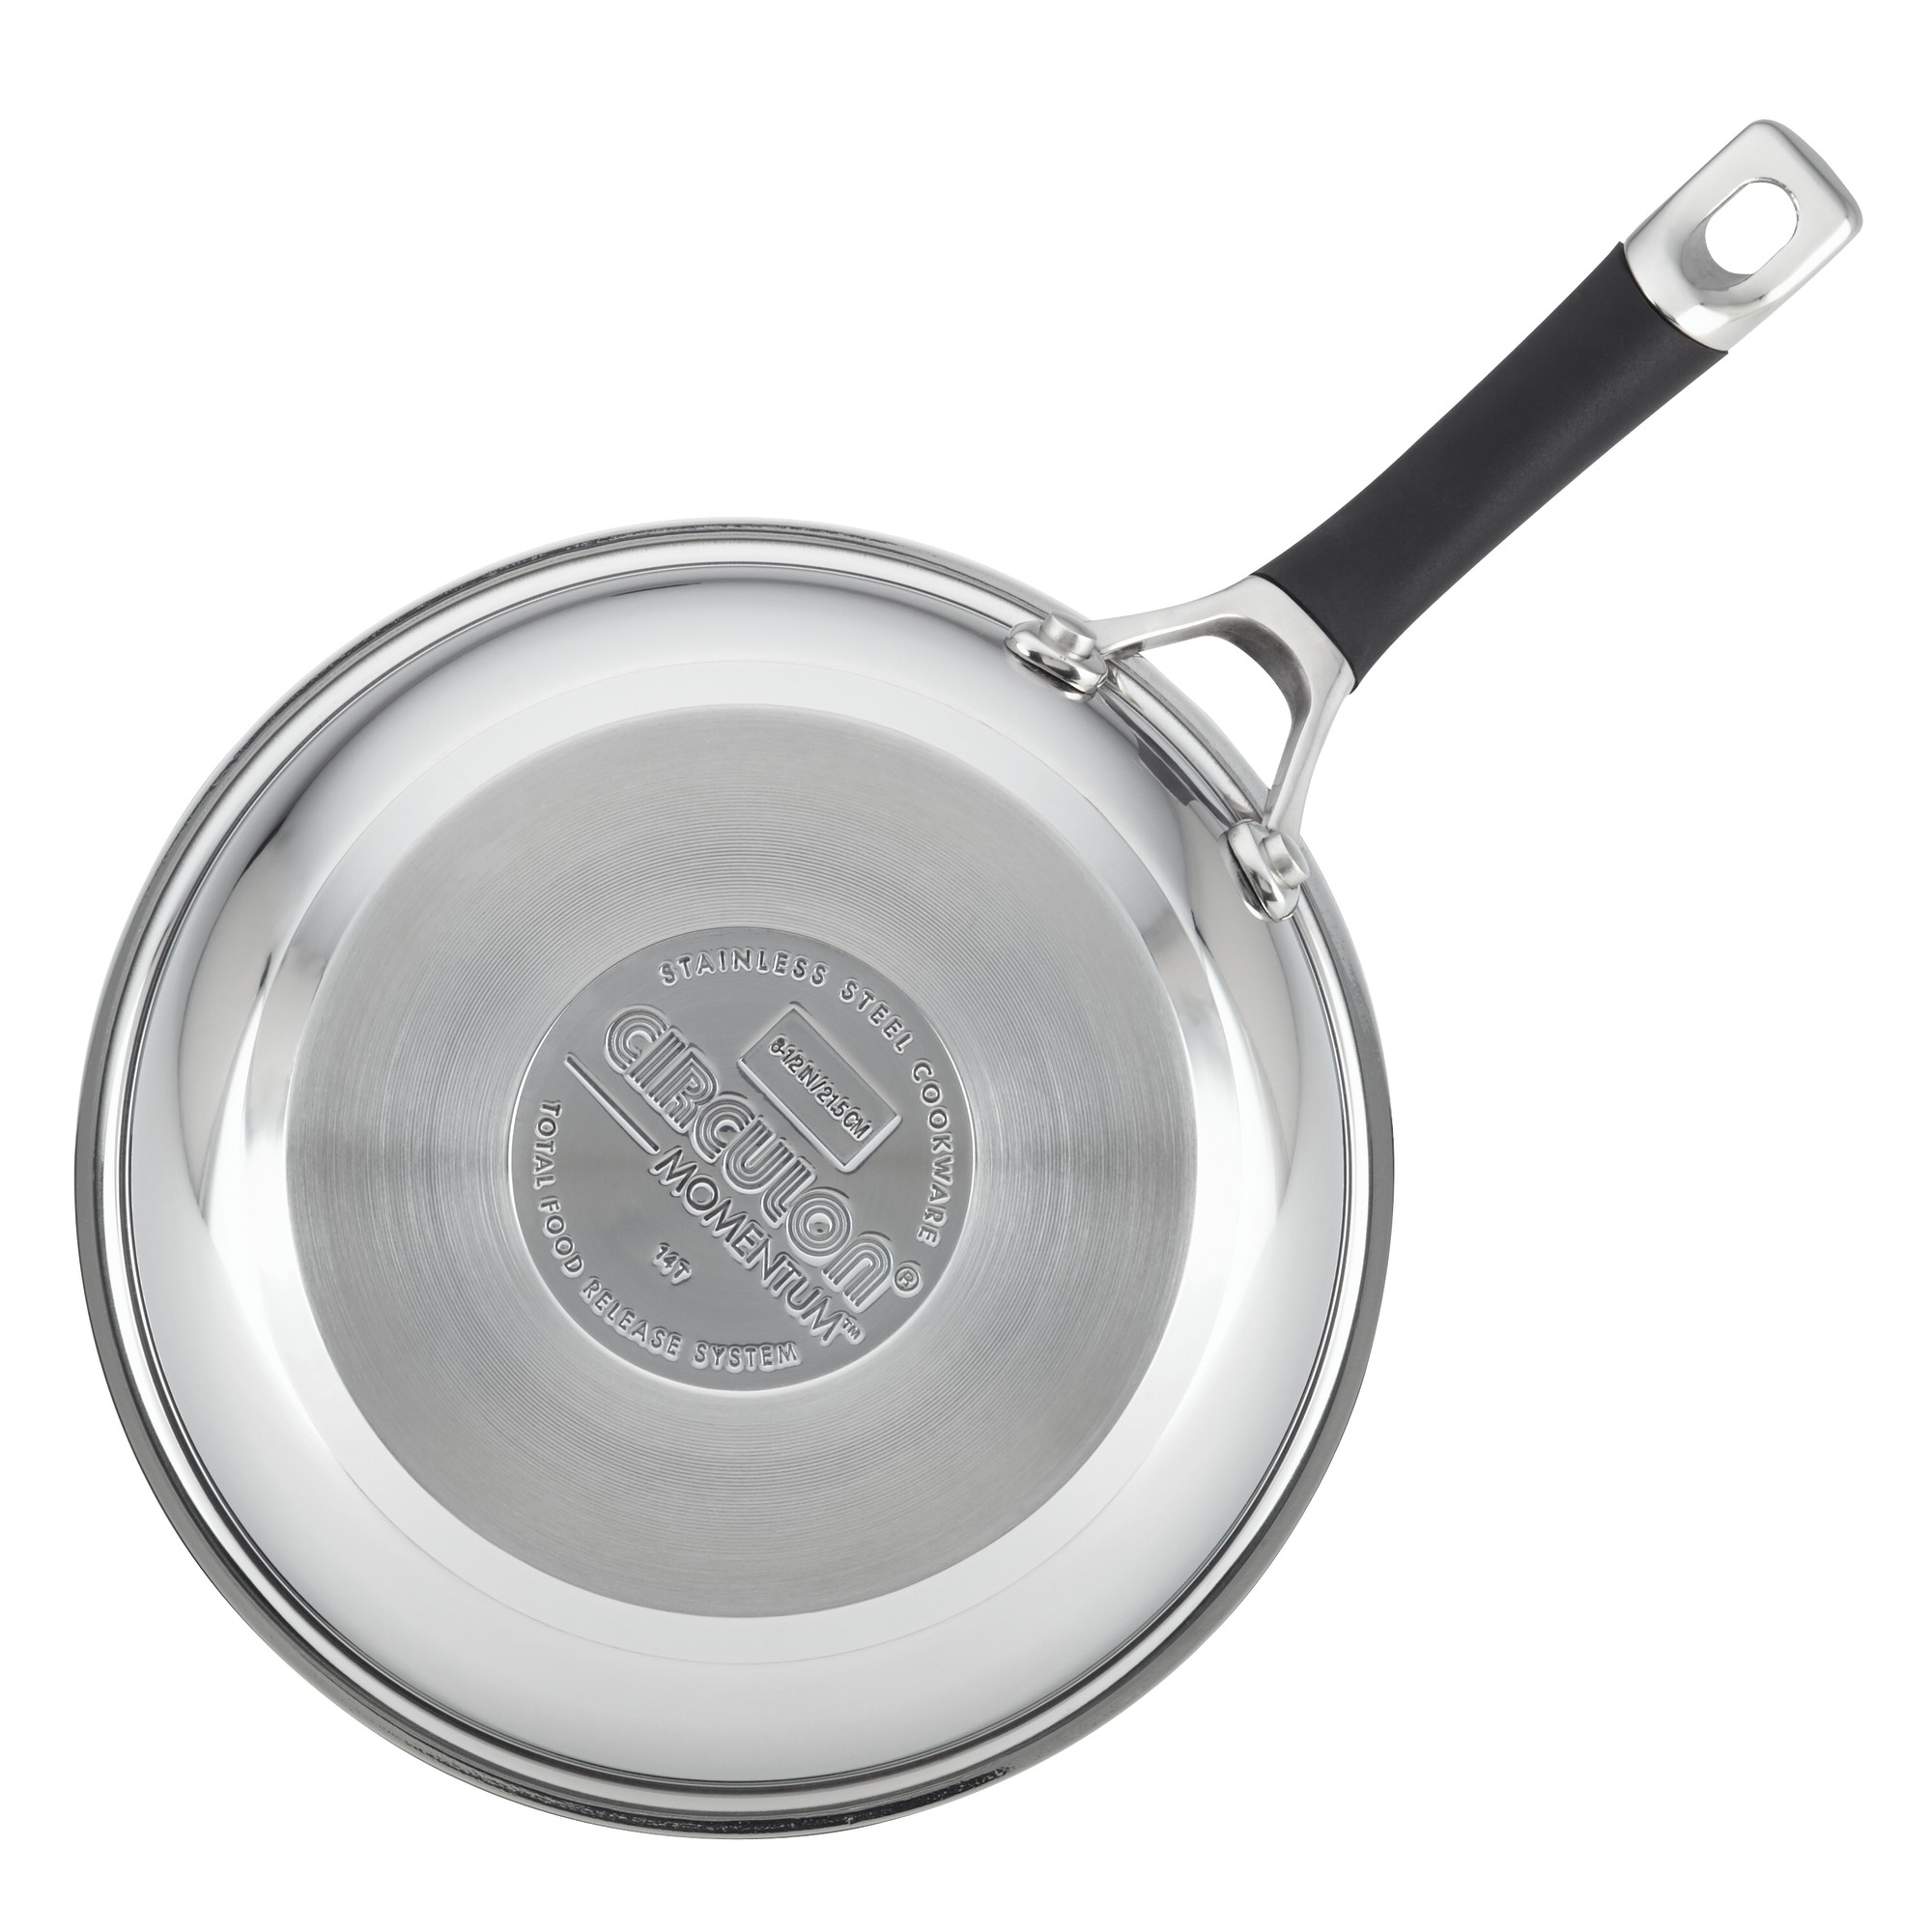 Circulon 11 Piece Momentum Stainless Steel Nonstick Pots and Pans - image 3 of 7